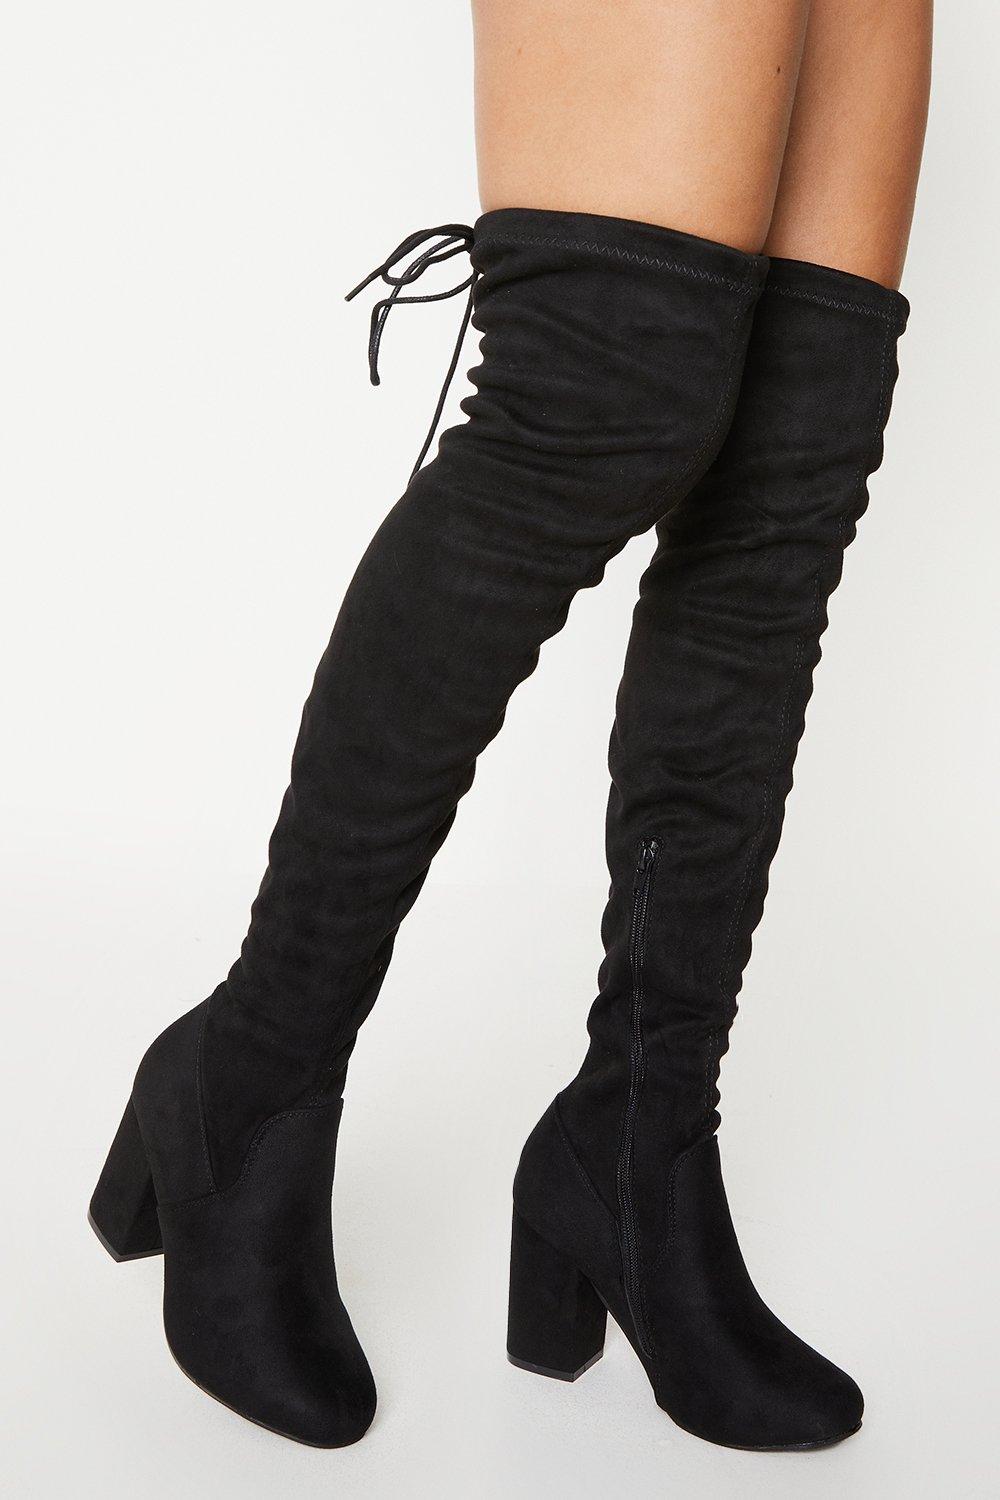 Women’s Wide Fit Krissy Over The Knee Boots - natural black - 6